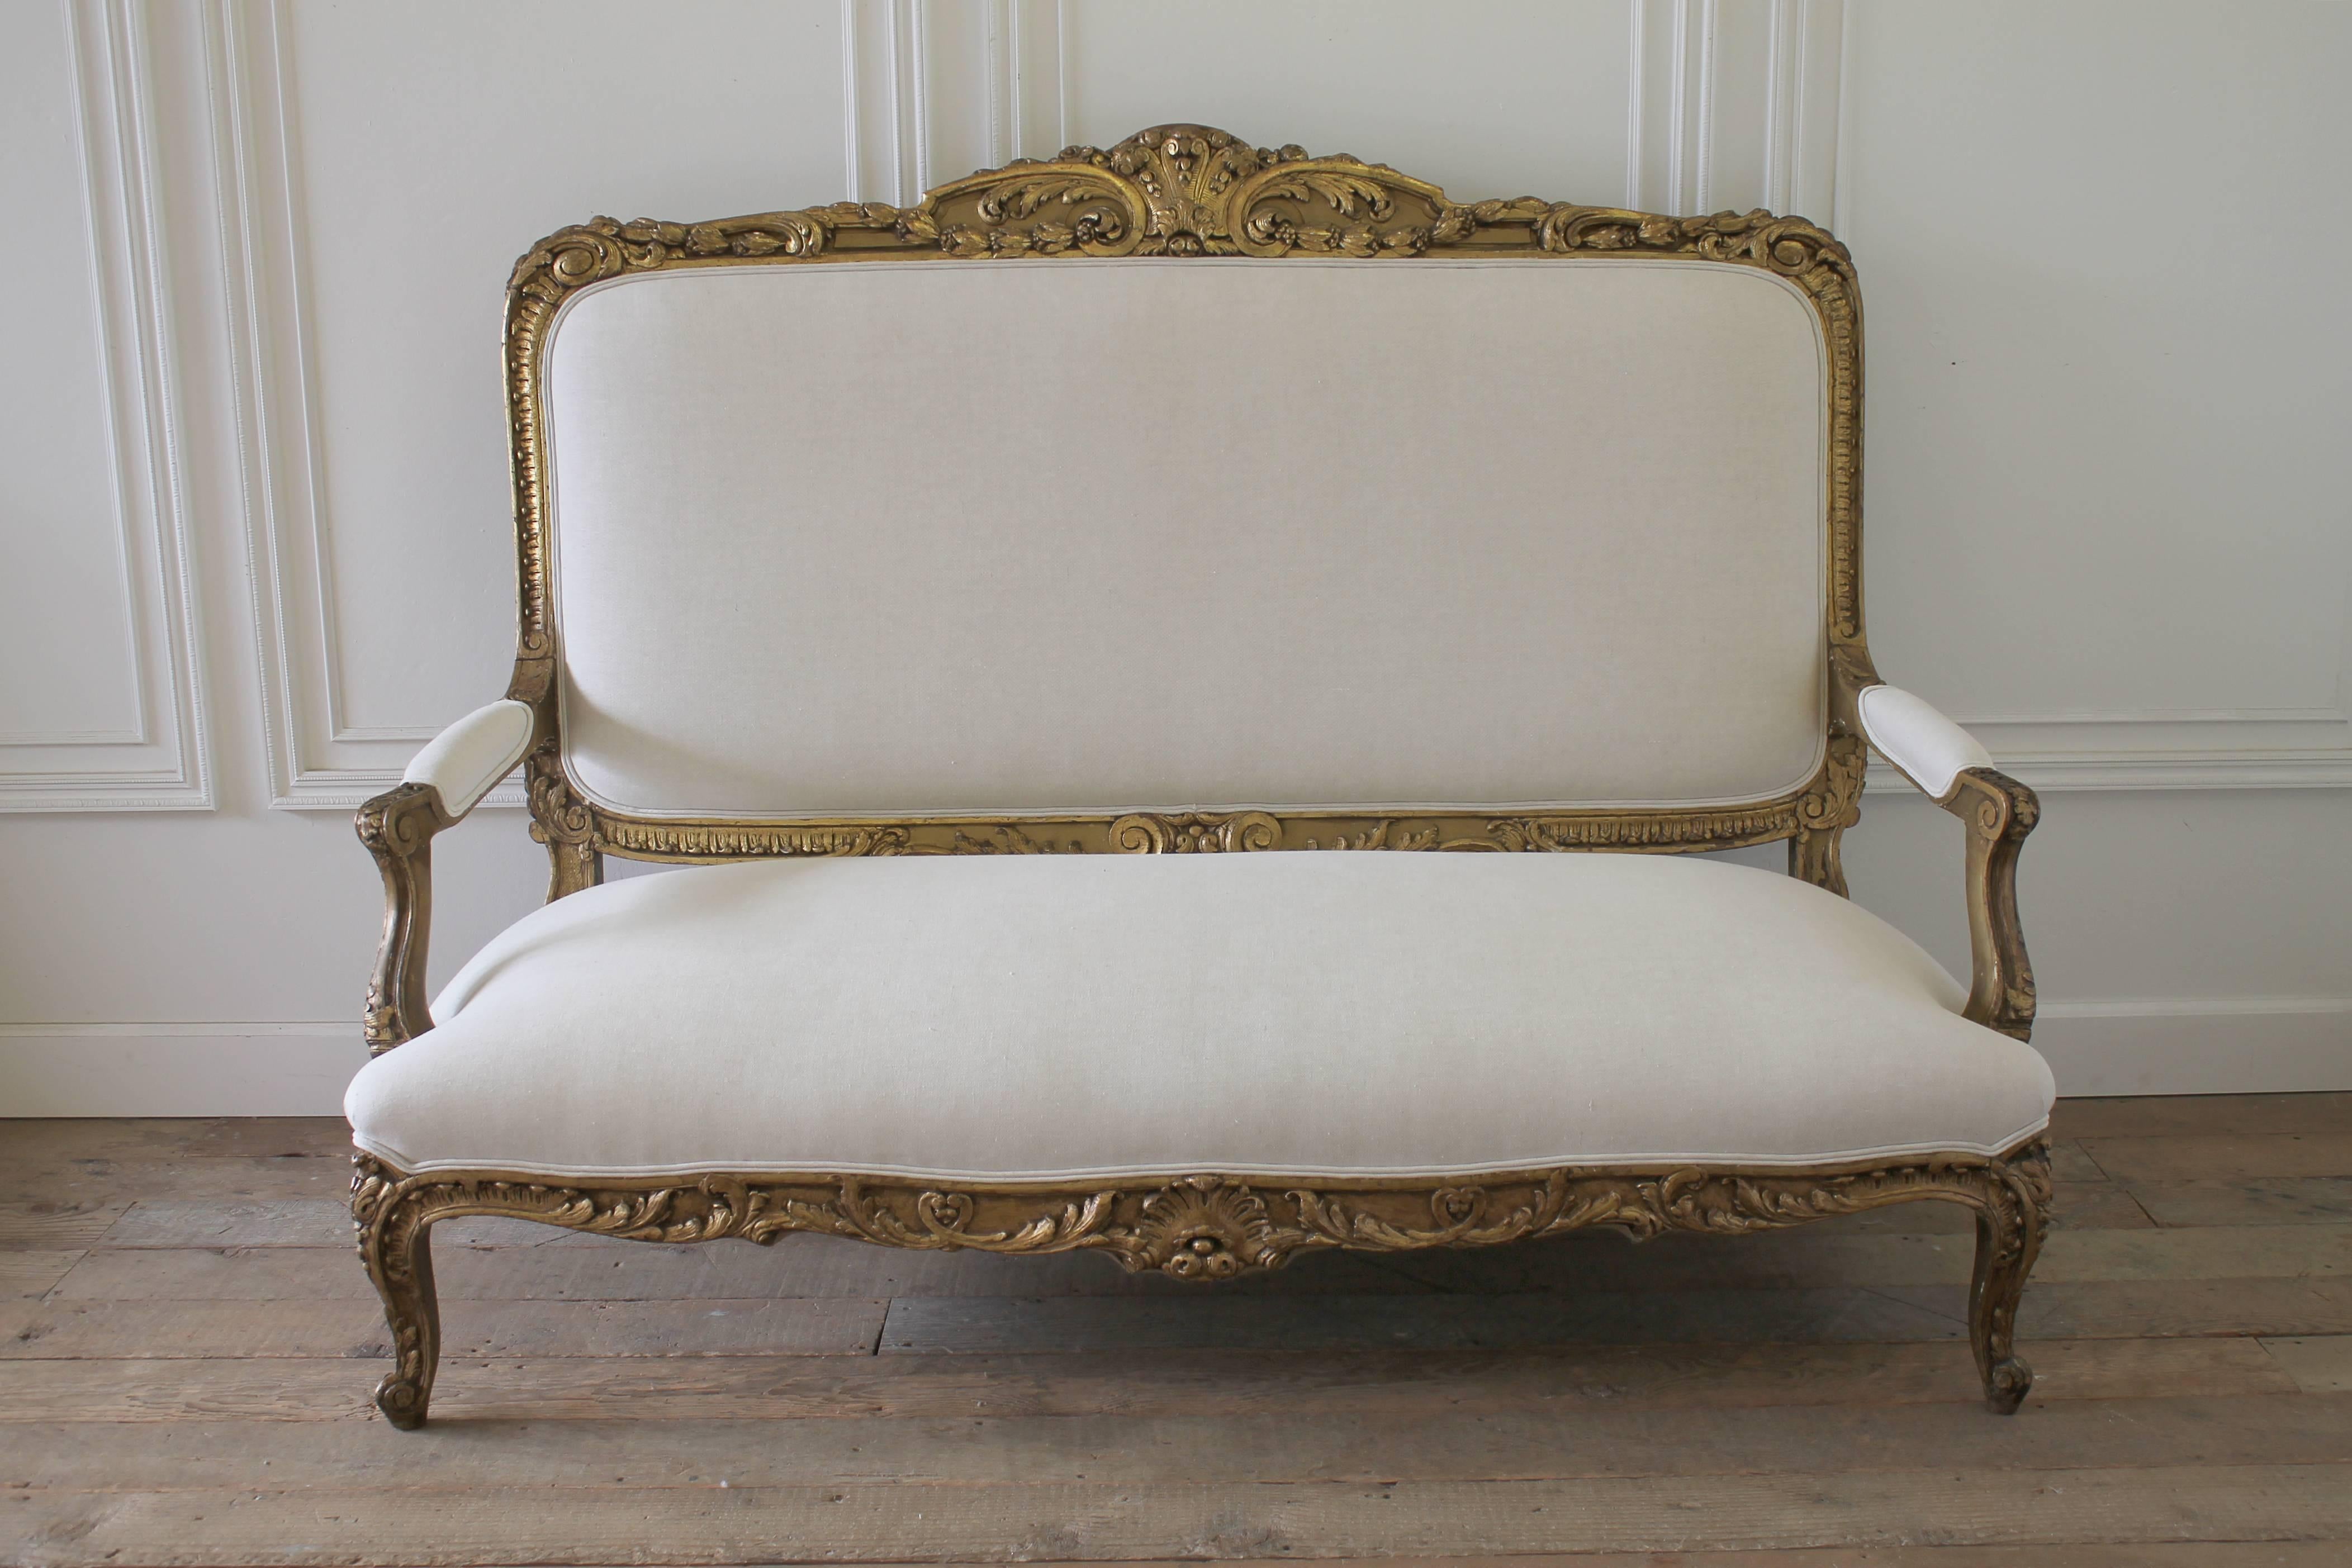 Gorgeous giltwood settee has intricate carved details of scrolls and leaf and berry motifs. We have reupholstered this in our 100% pure Belgian linen, color is oatmeal, or off-white. Finished with a double welt, this settee has original spring seat,